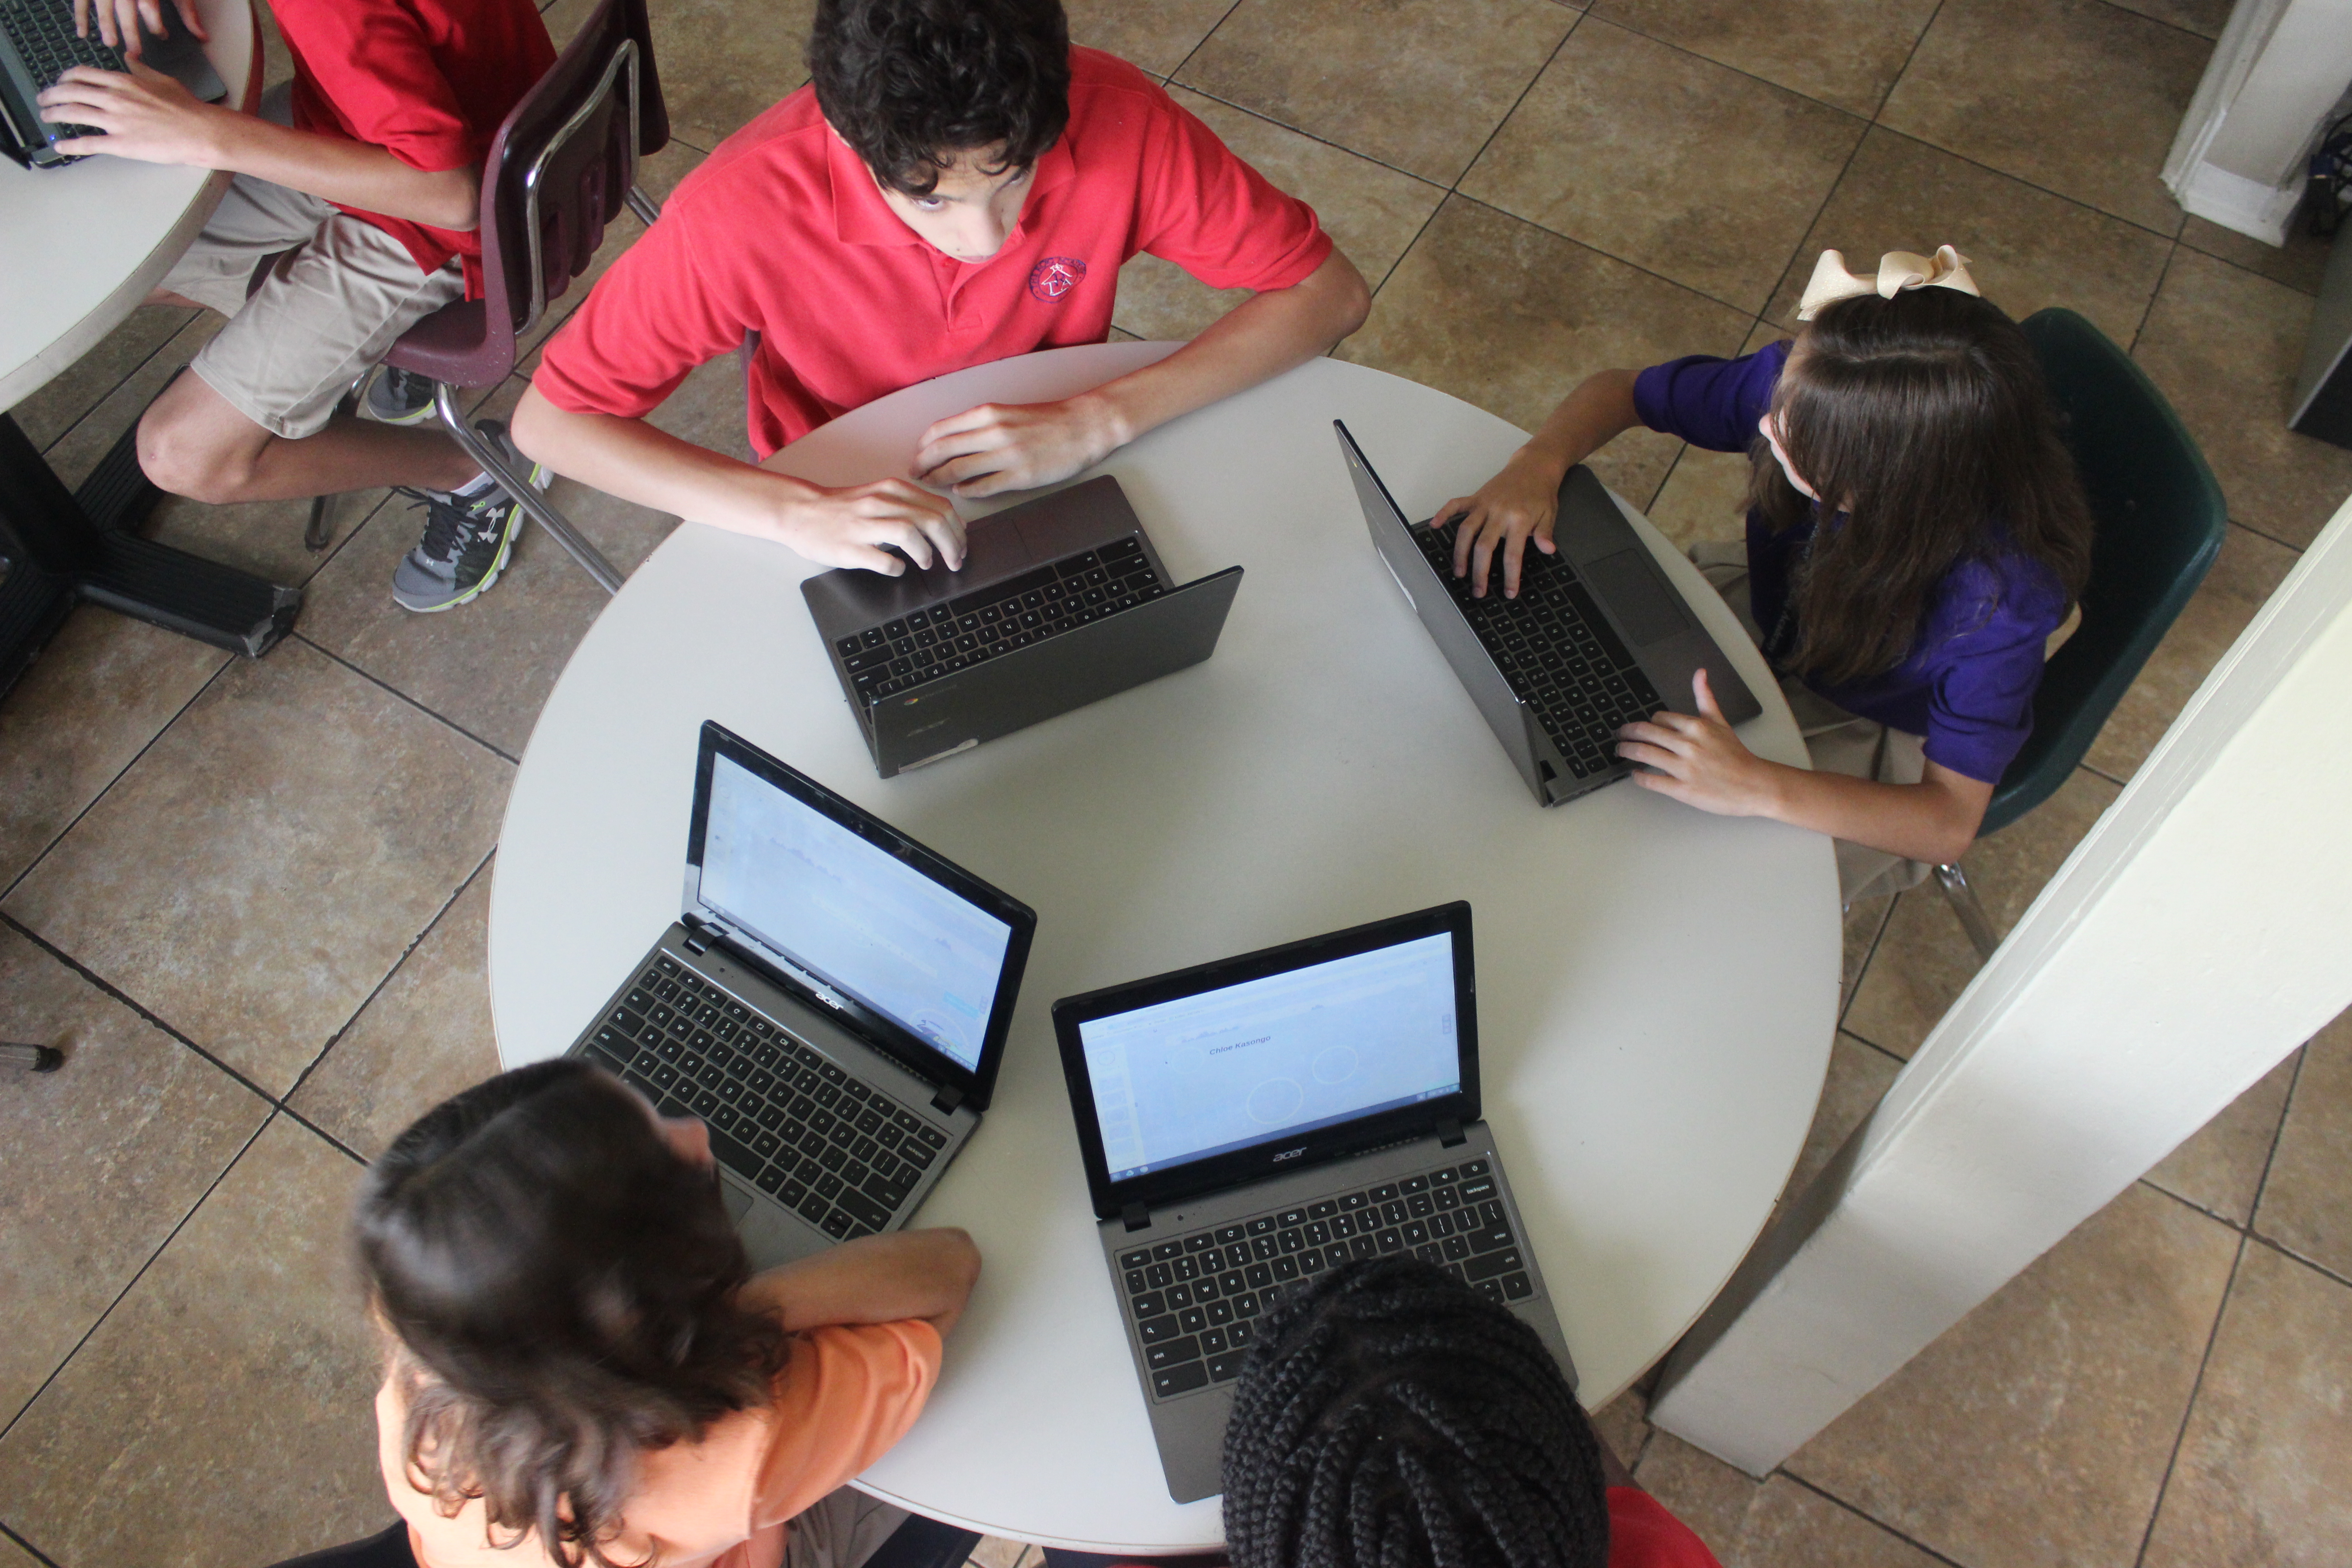 4 kids sitting around a table using laptops